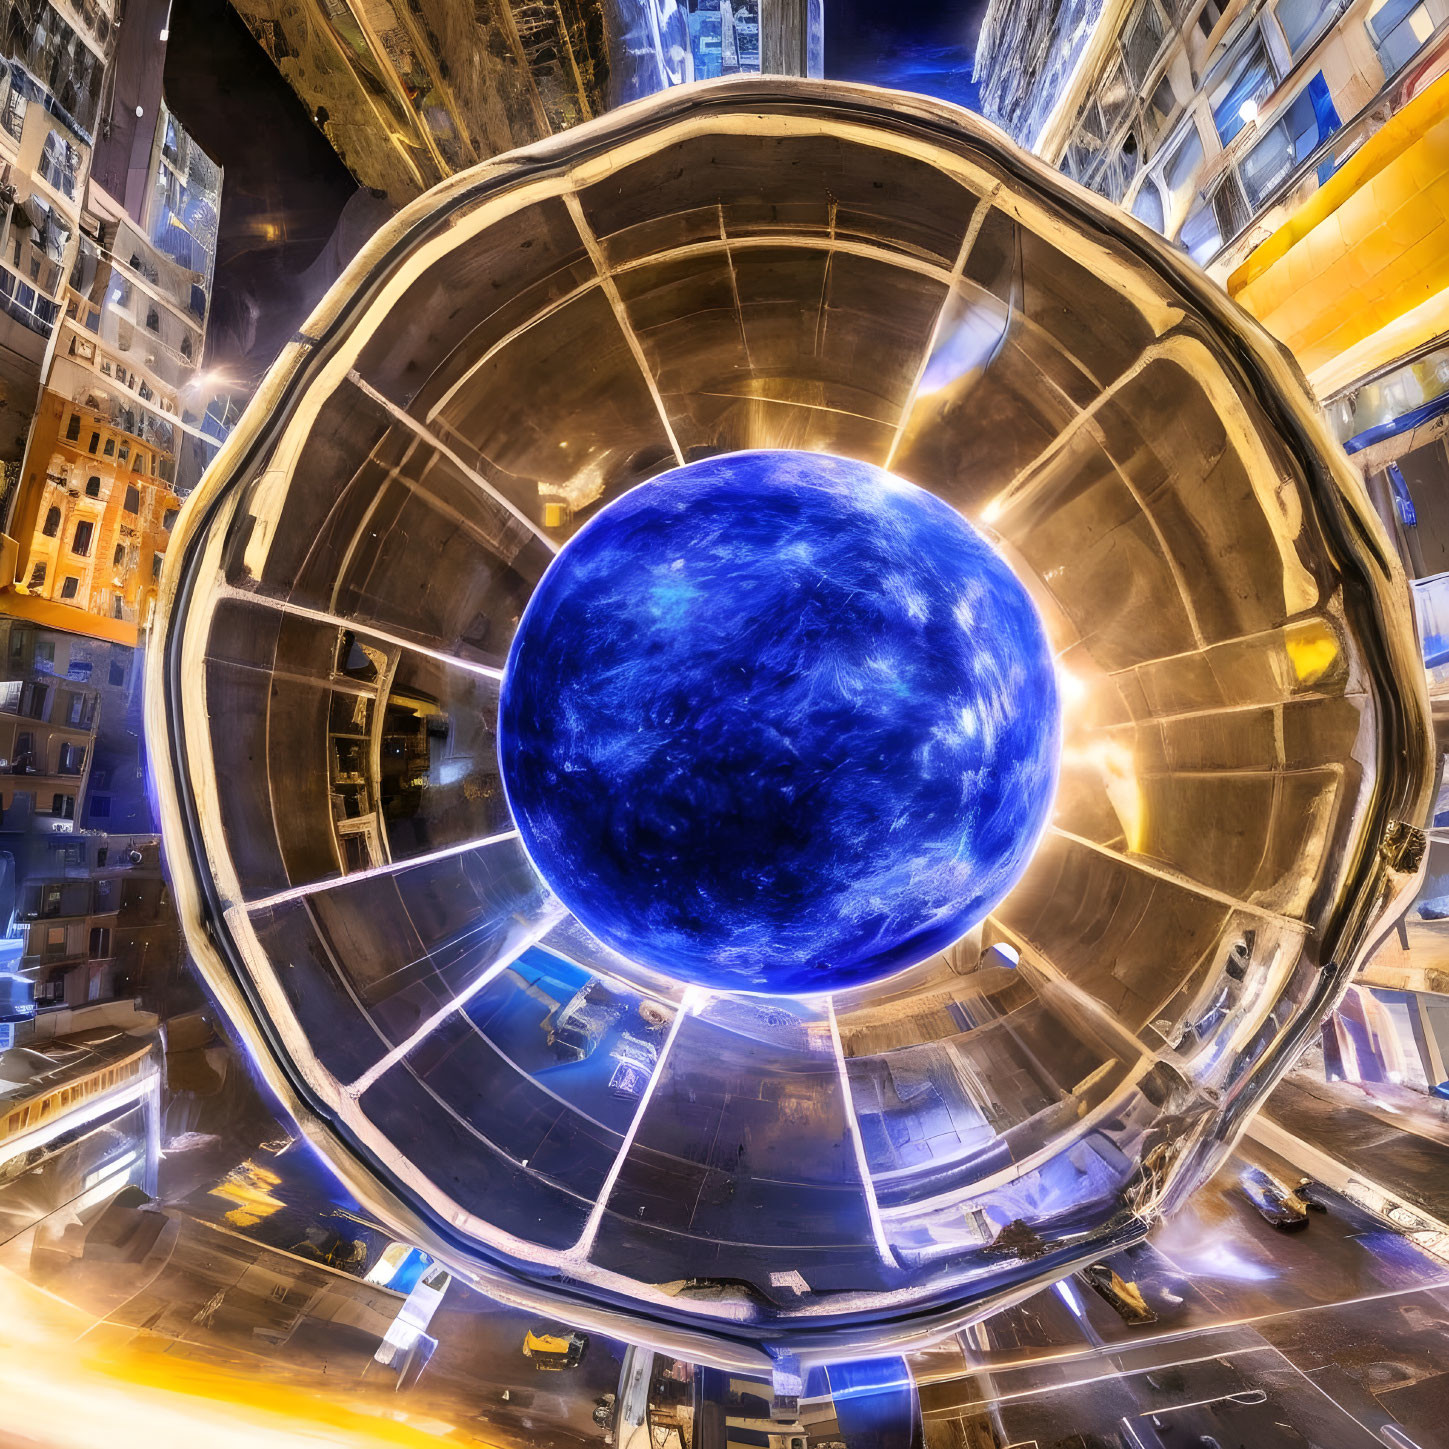 Cityscape at Night with Spherical Distortion and Glowing Blue Sphere